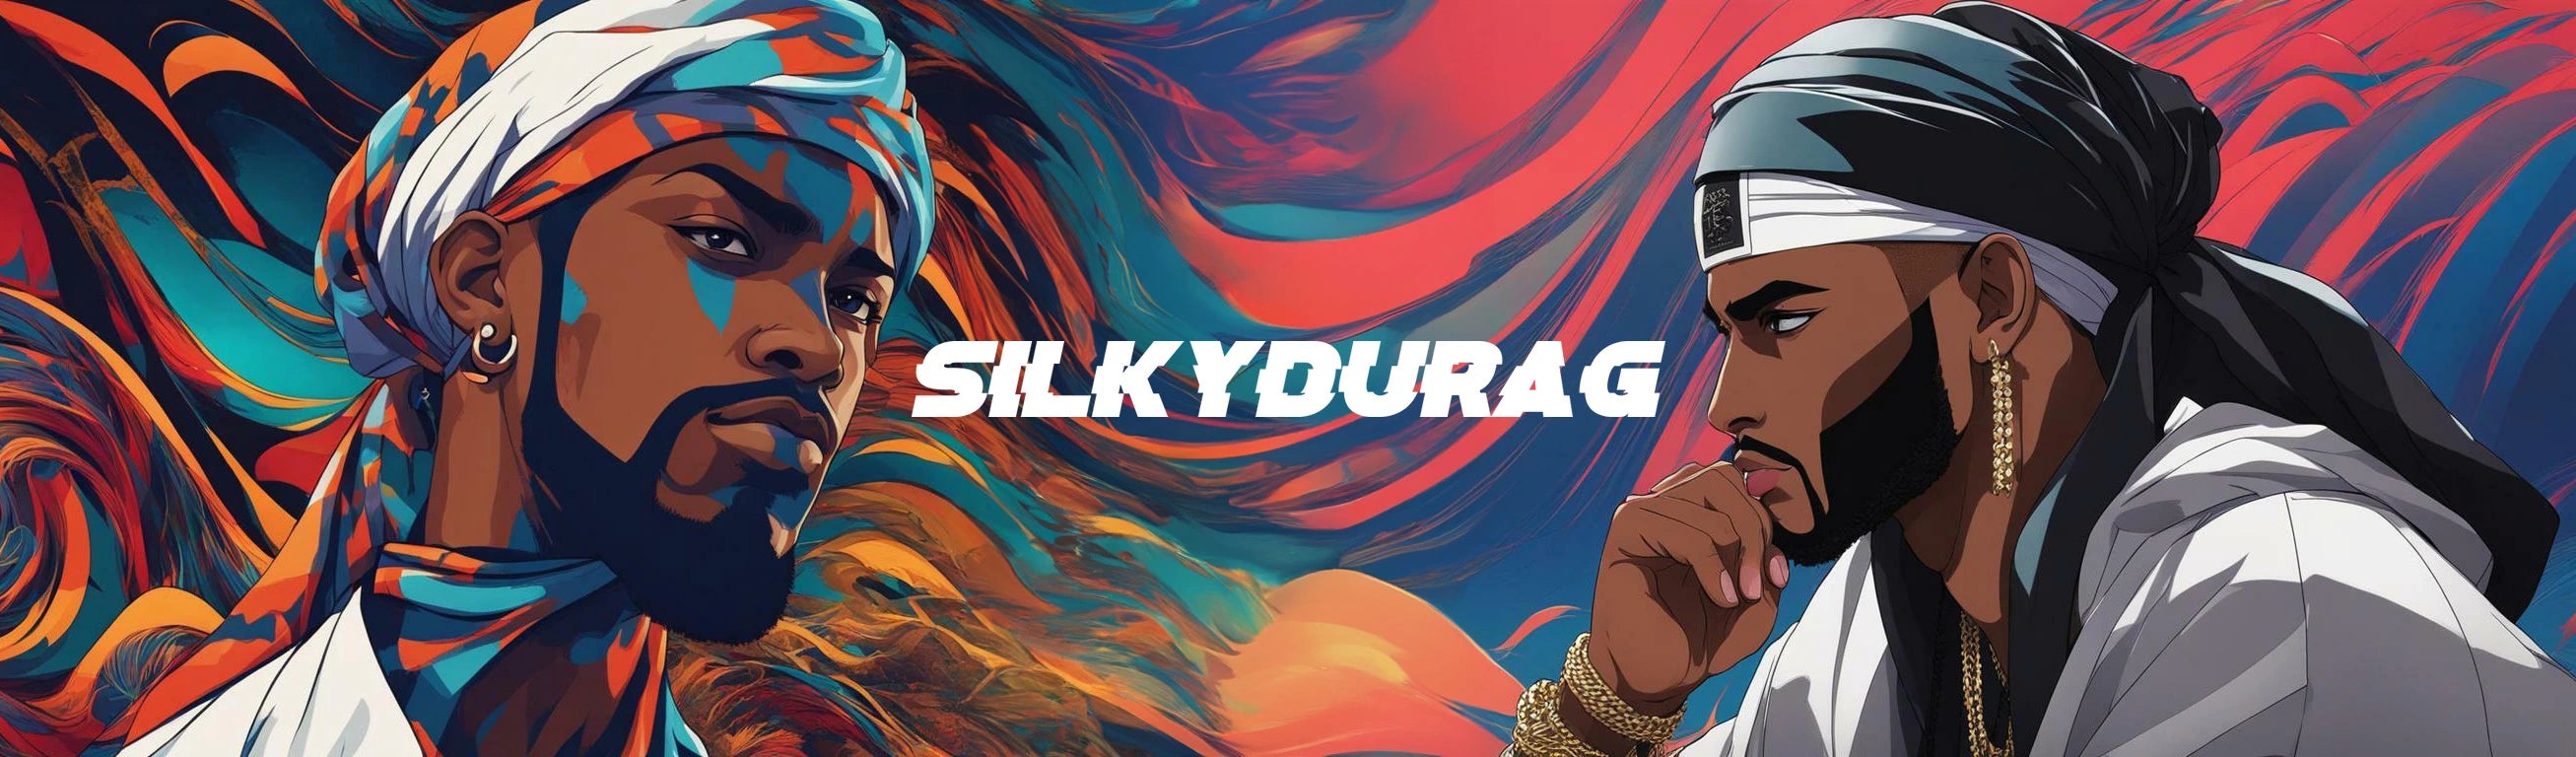 Logo of SilkyDurag online store in the middle of two Afro-American men wearing durags, with a gradient waves background.